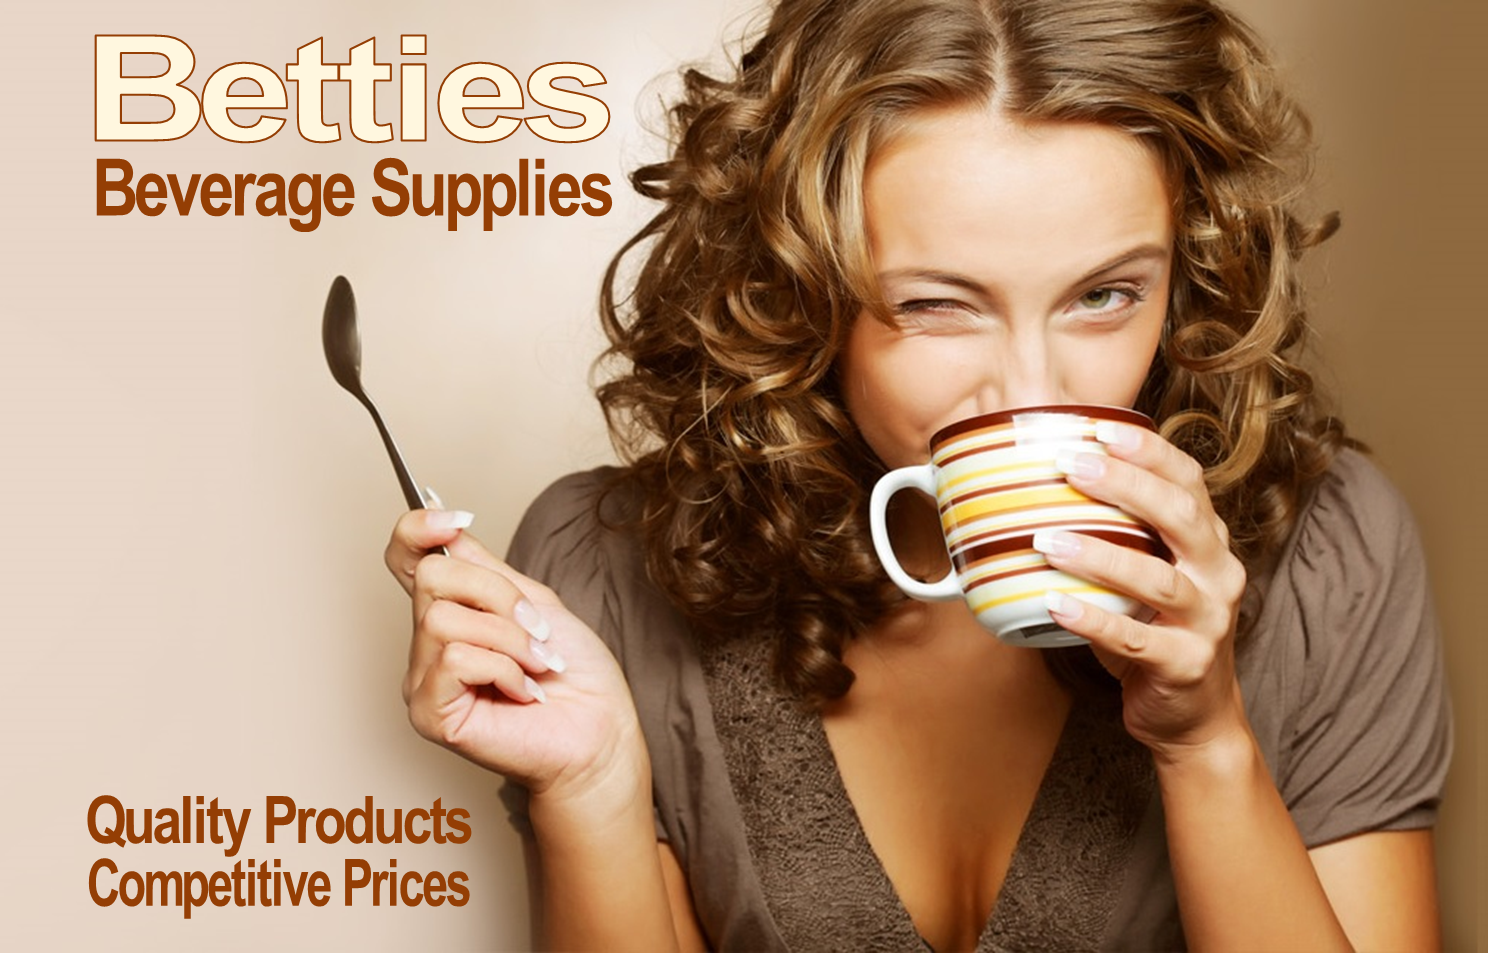 Local Deals in Cardiff on Teas, coffees and other beverages with Betties Beverages